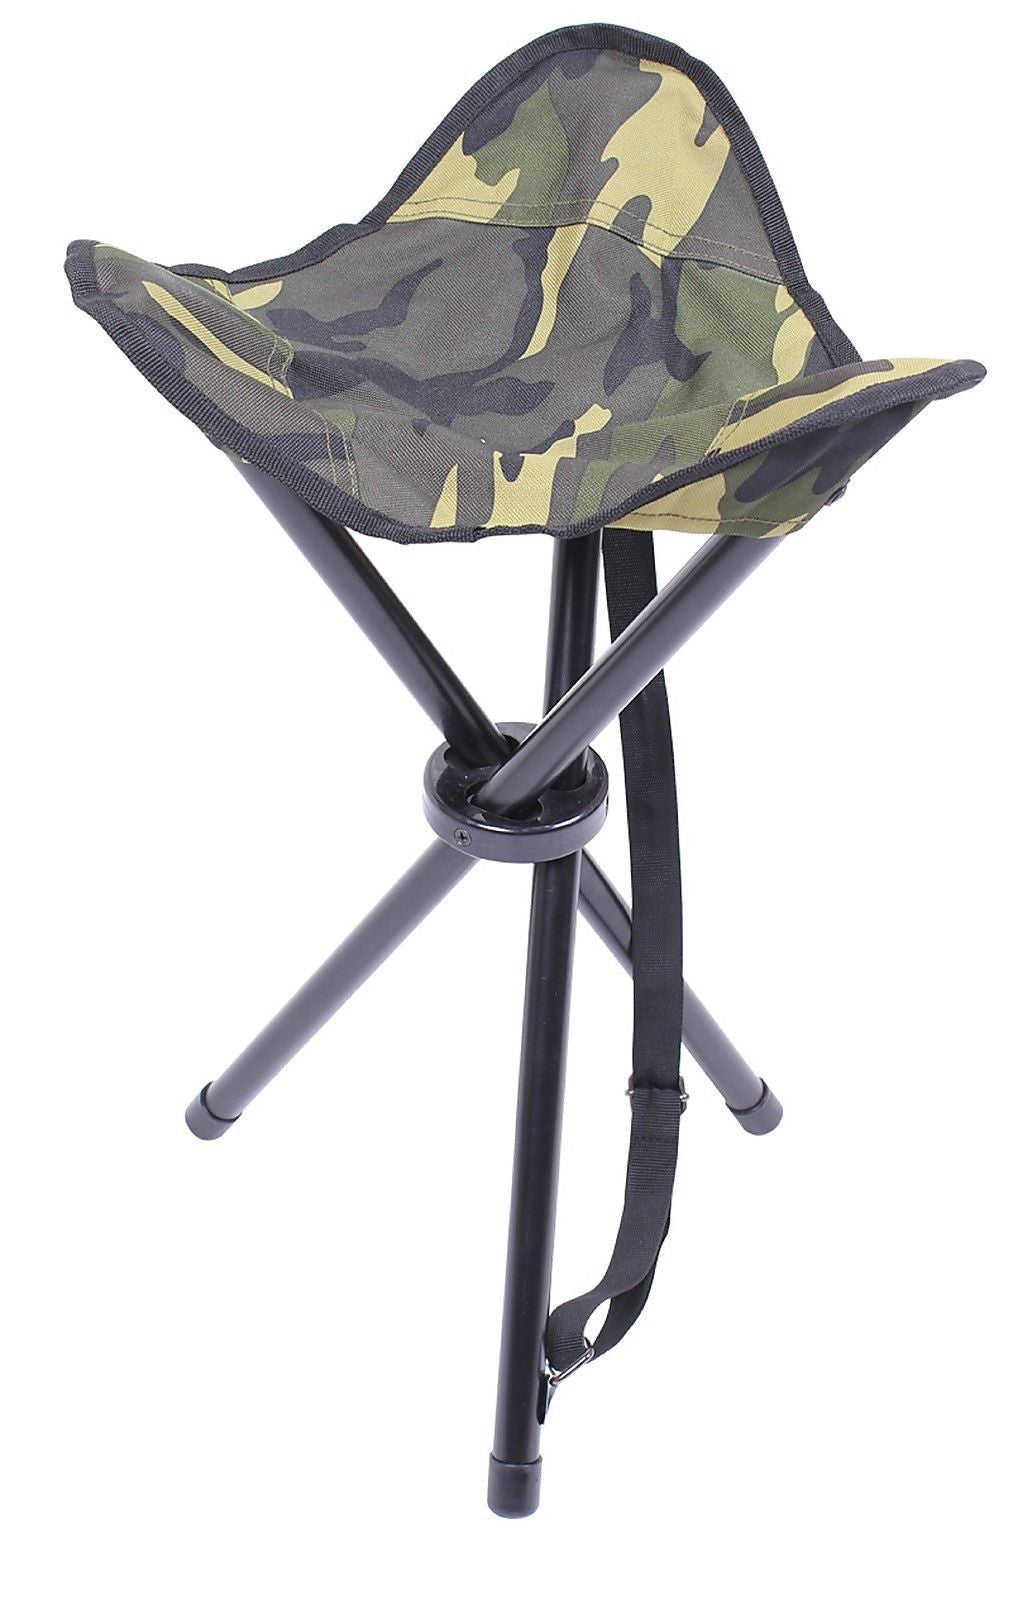 Foldable Woodland Camouflage 22" High Collapsible Sitting Stool w/ Carry Bag